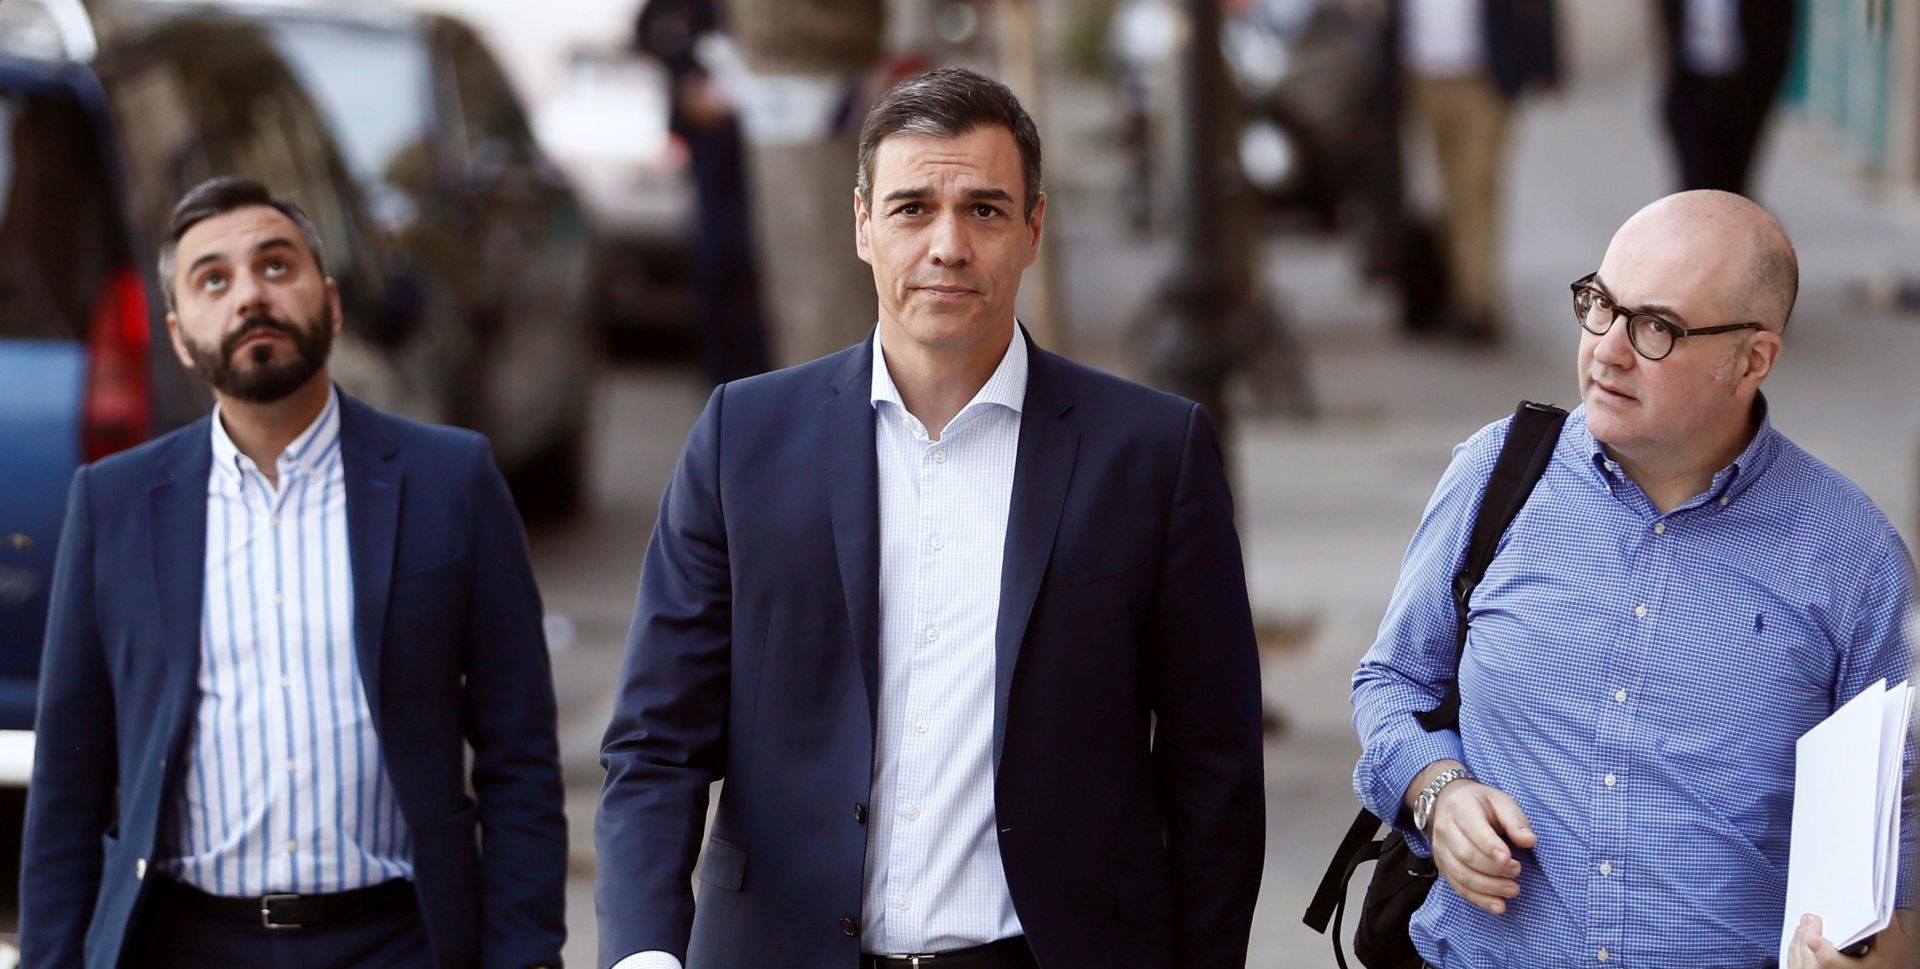 epa07758737 Actintg Spanish Prime Minister, Pedro Sanchez (C), arrives to meet representatives from the tertiary sector, the educative community and the rural depopulated territories in Madrid, Spain, 06 August 2019. Sanchez meets civic groups in an attempt to achieve support to form Government, after the second vote for an investiture at Parliament failed on 25 July 2019. Spain will be holding elections on 10 November 2019 if Sanchez fails to obtain enough support for a new investiture in September.  EPA/MARISCAL